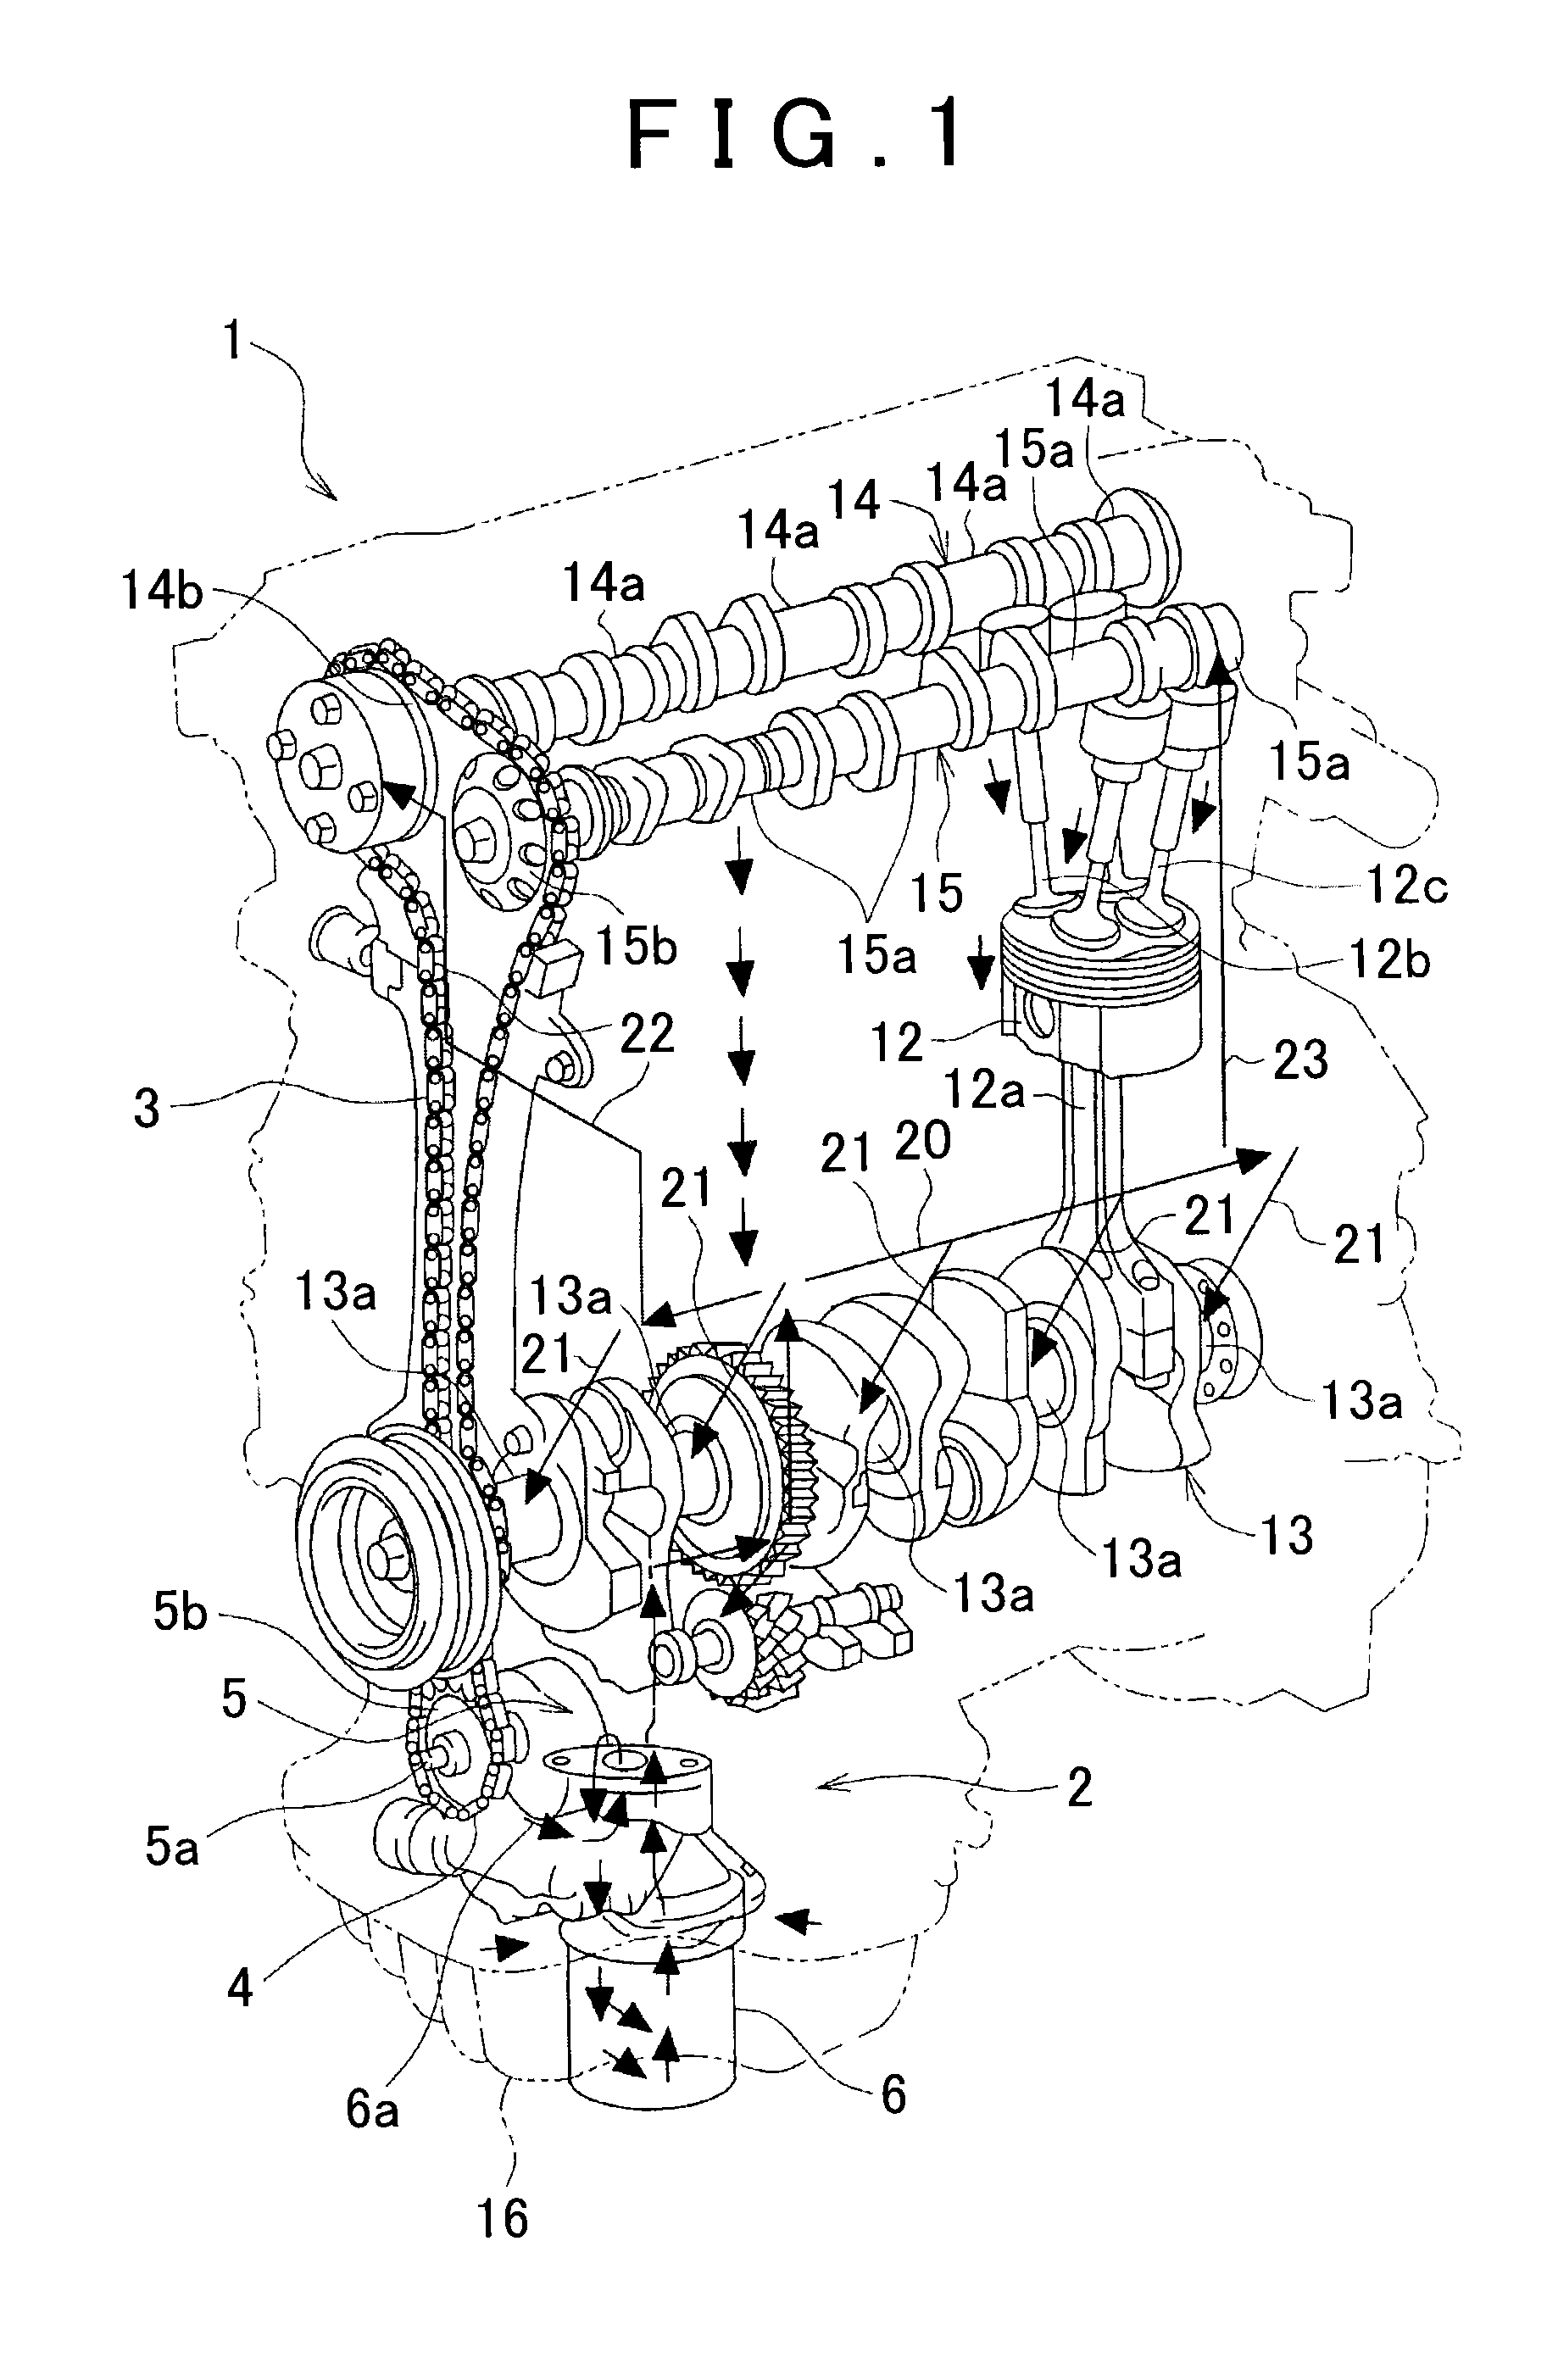 Control device for oil pump